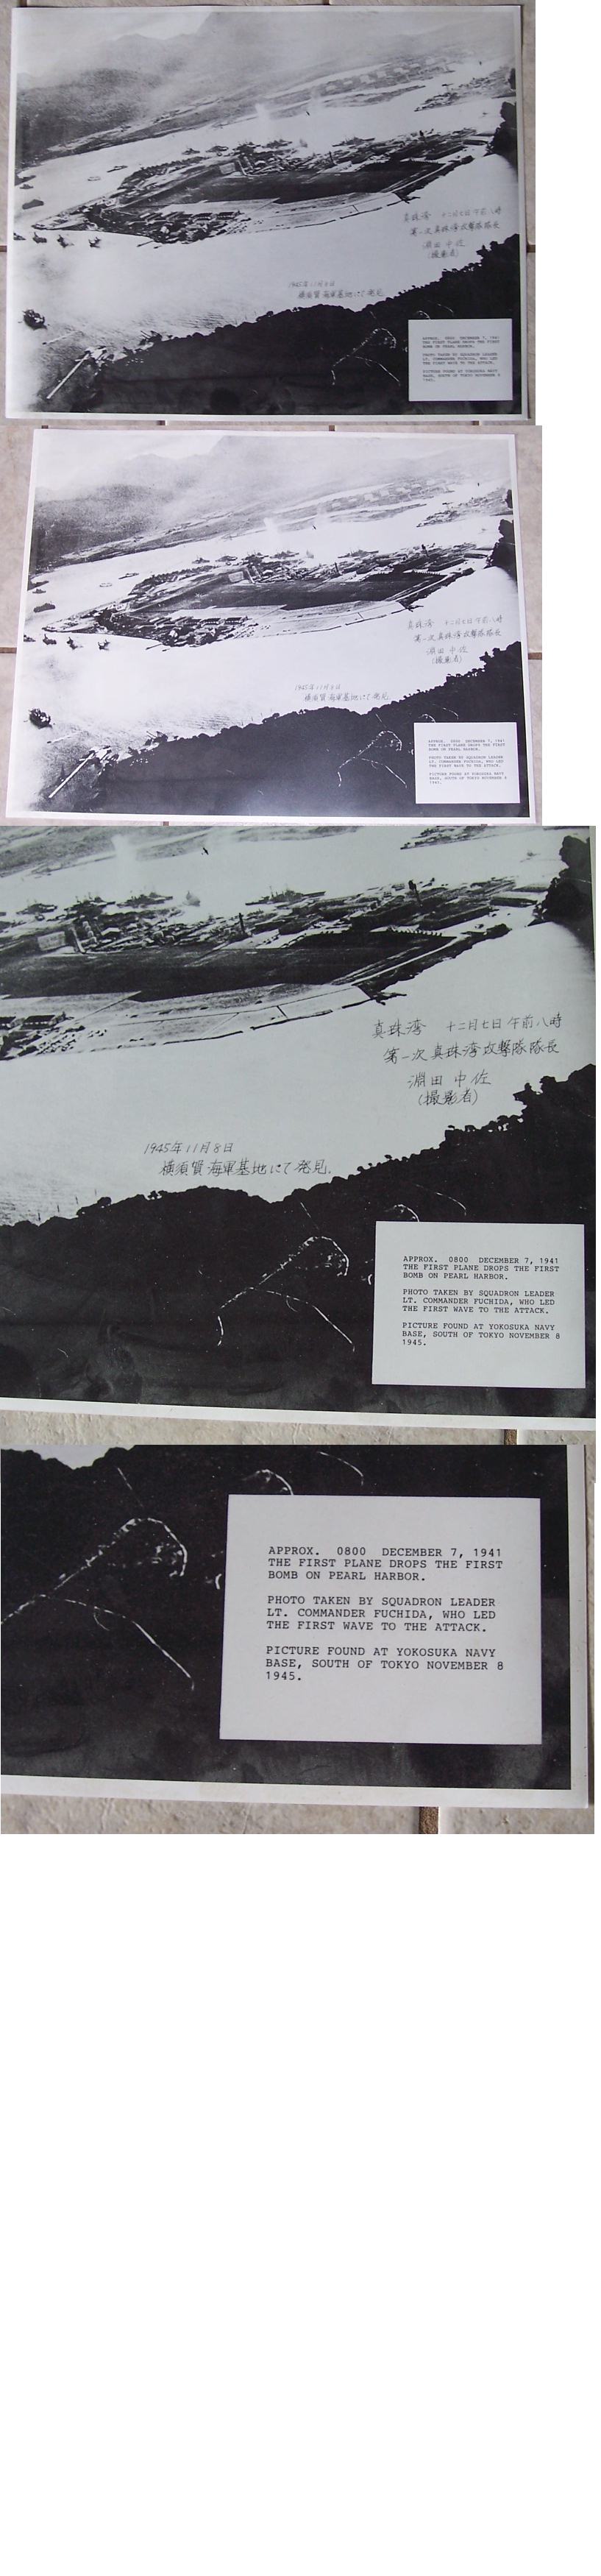 Japanese Peral Harbour attack photo